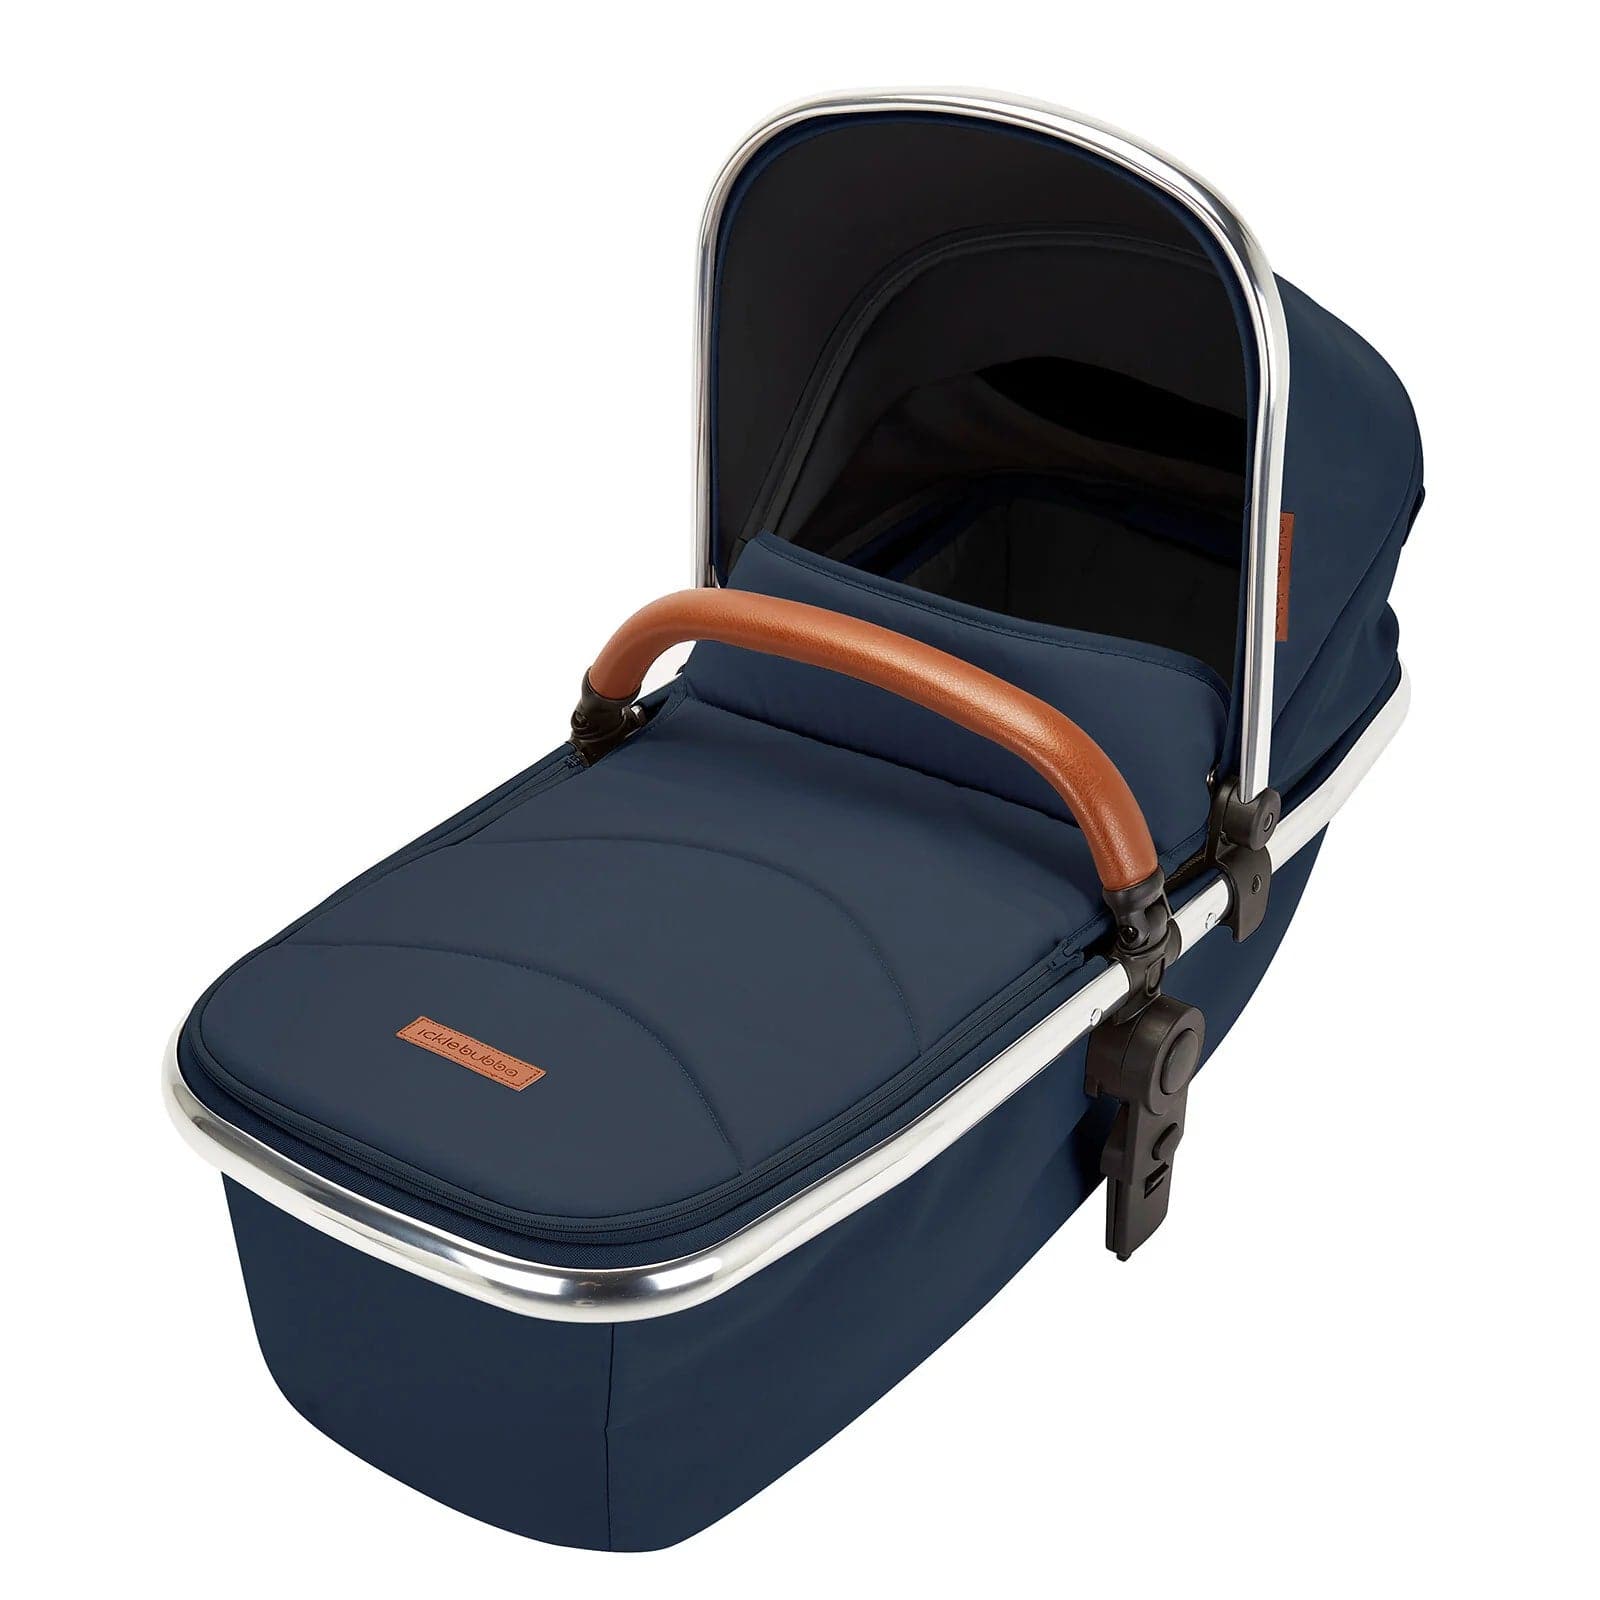 Ickle Bubba Eclipse 2 In 1 Carrycot & Pushchair - Chrome / Midnight Blue / Tan -  | For Your Little One